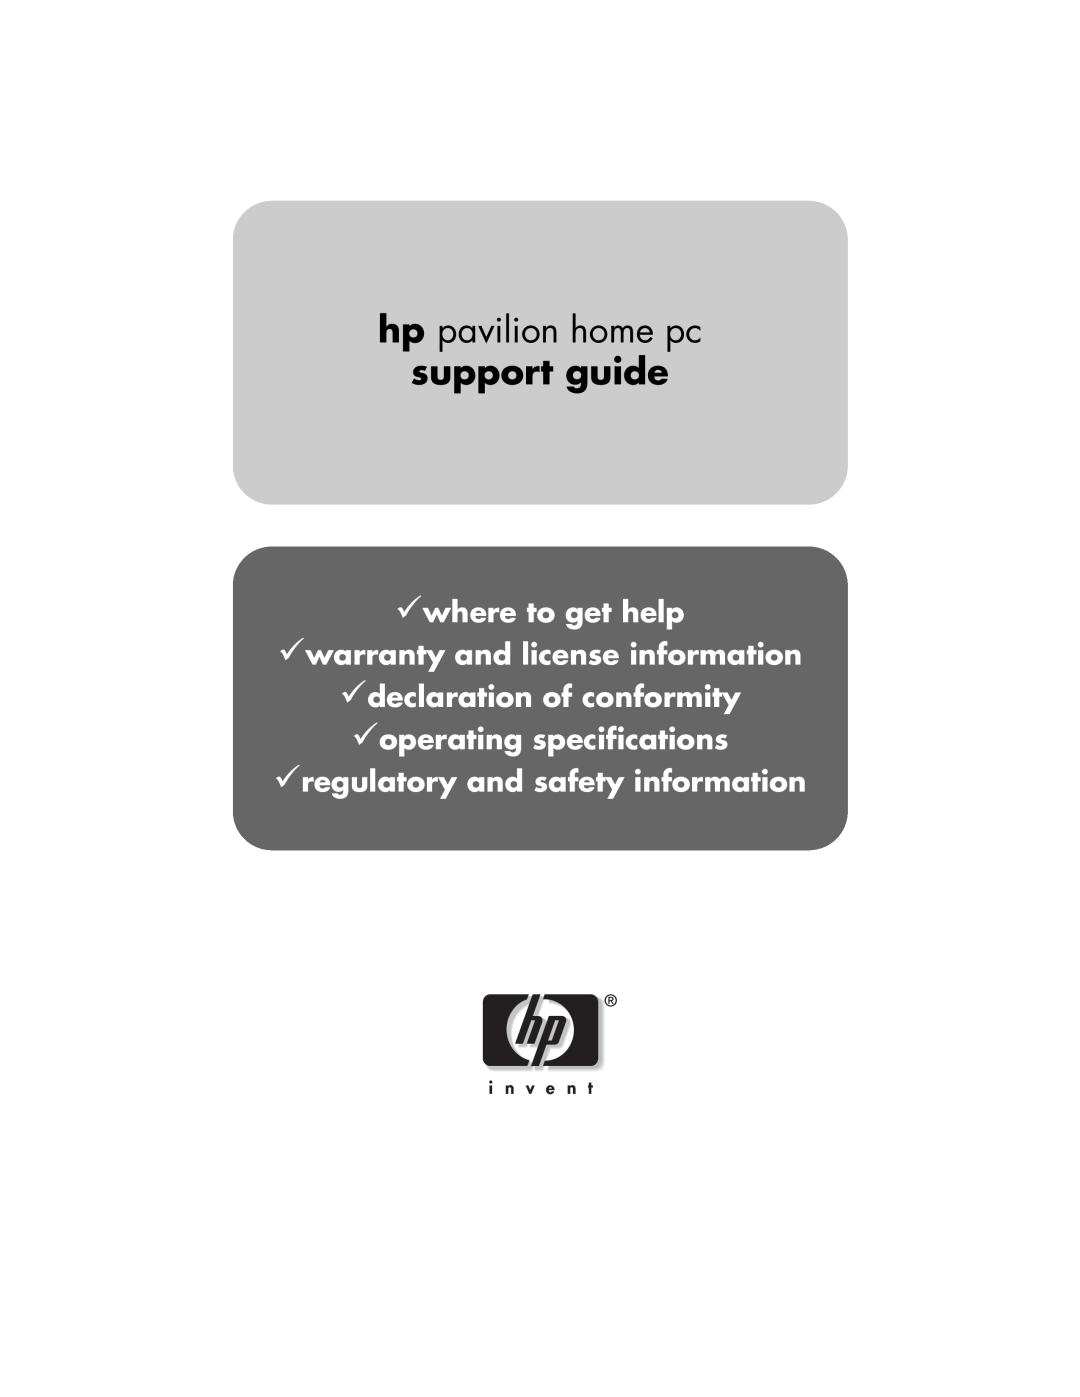 HP a145.uk, a171.uk, a150.uk manual where to get help warranty and license information, hp pavilion home pc, support guide 